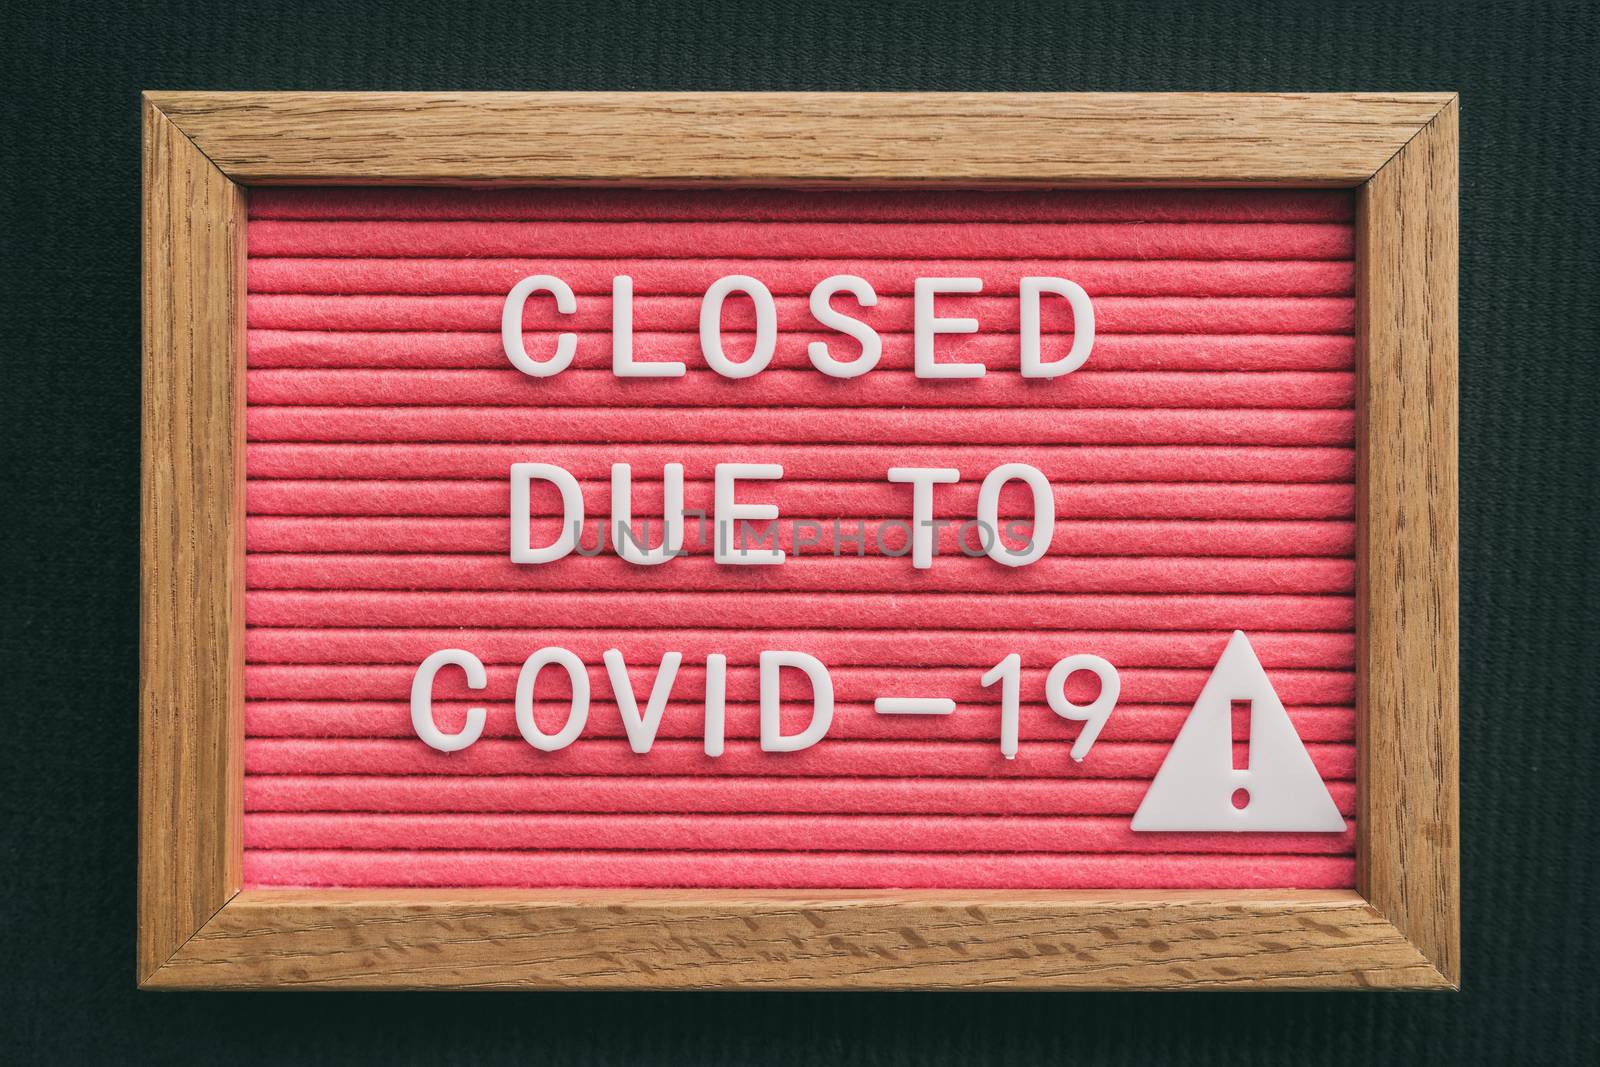 Coronavirus store closure sign. Closed due to COVID-19 message board for retail business COVID-19 pandemic outbreak. Government shutdown of restaurants, bakeries, non essential services. Pink letters by Maridav